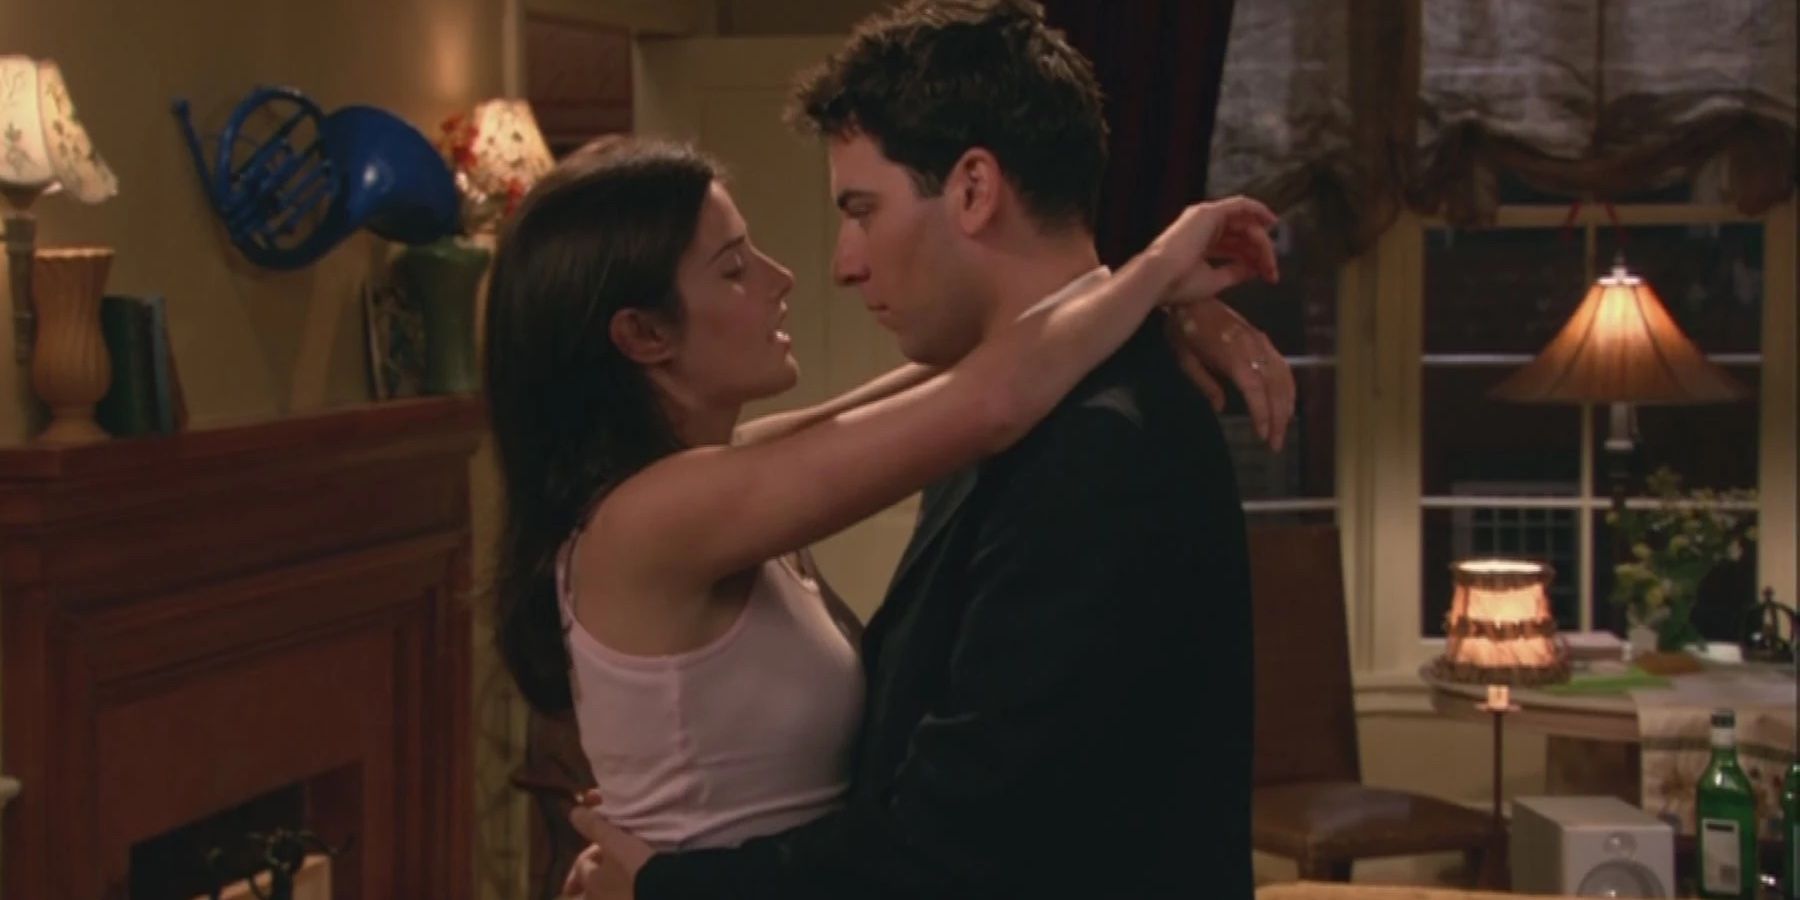 Cobie Smulders and Josh Radnor as Robin and Ted about to kiss in the How I Met Your Mother pilot episode